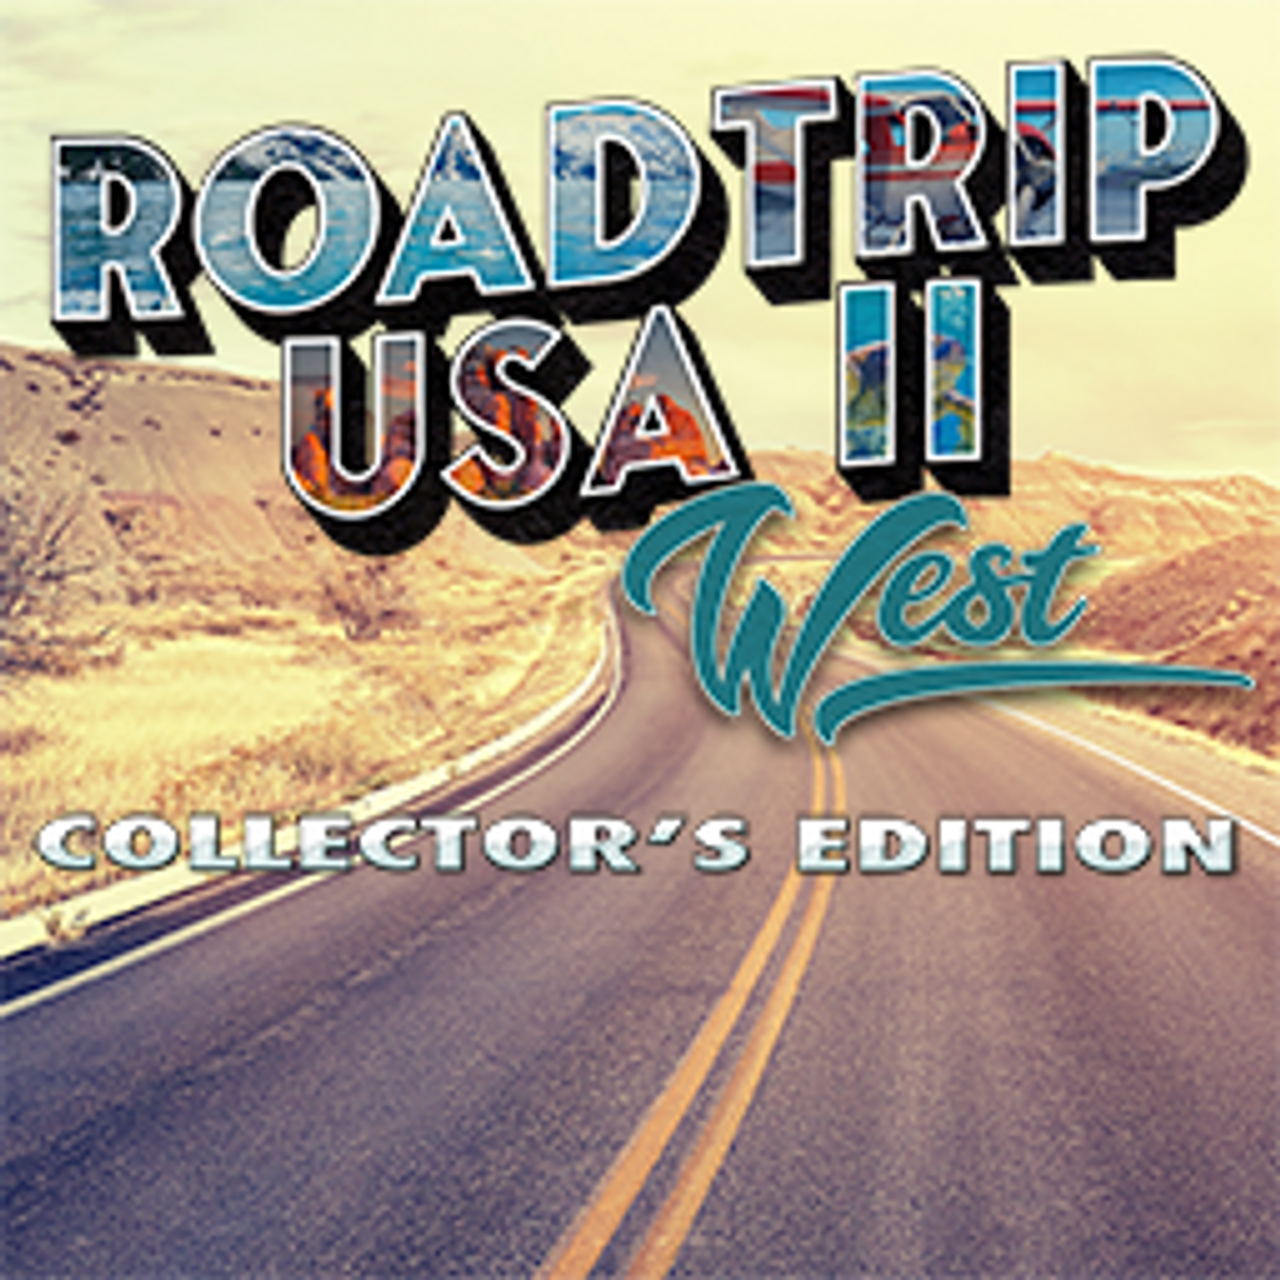 Road Trip USA II: West Collector's Edition